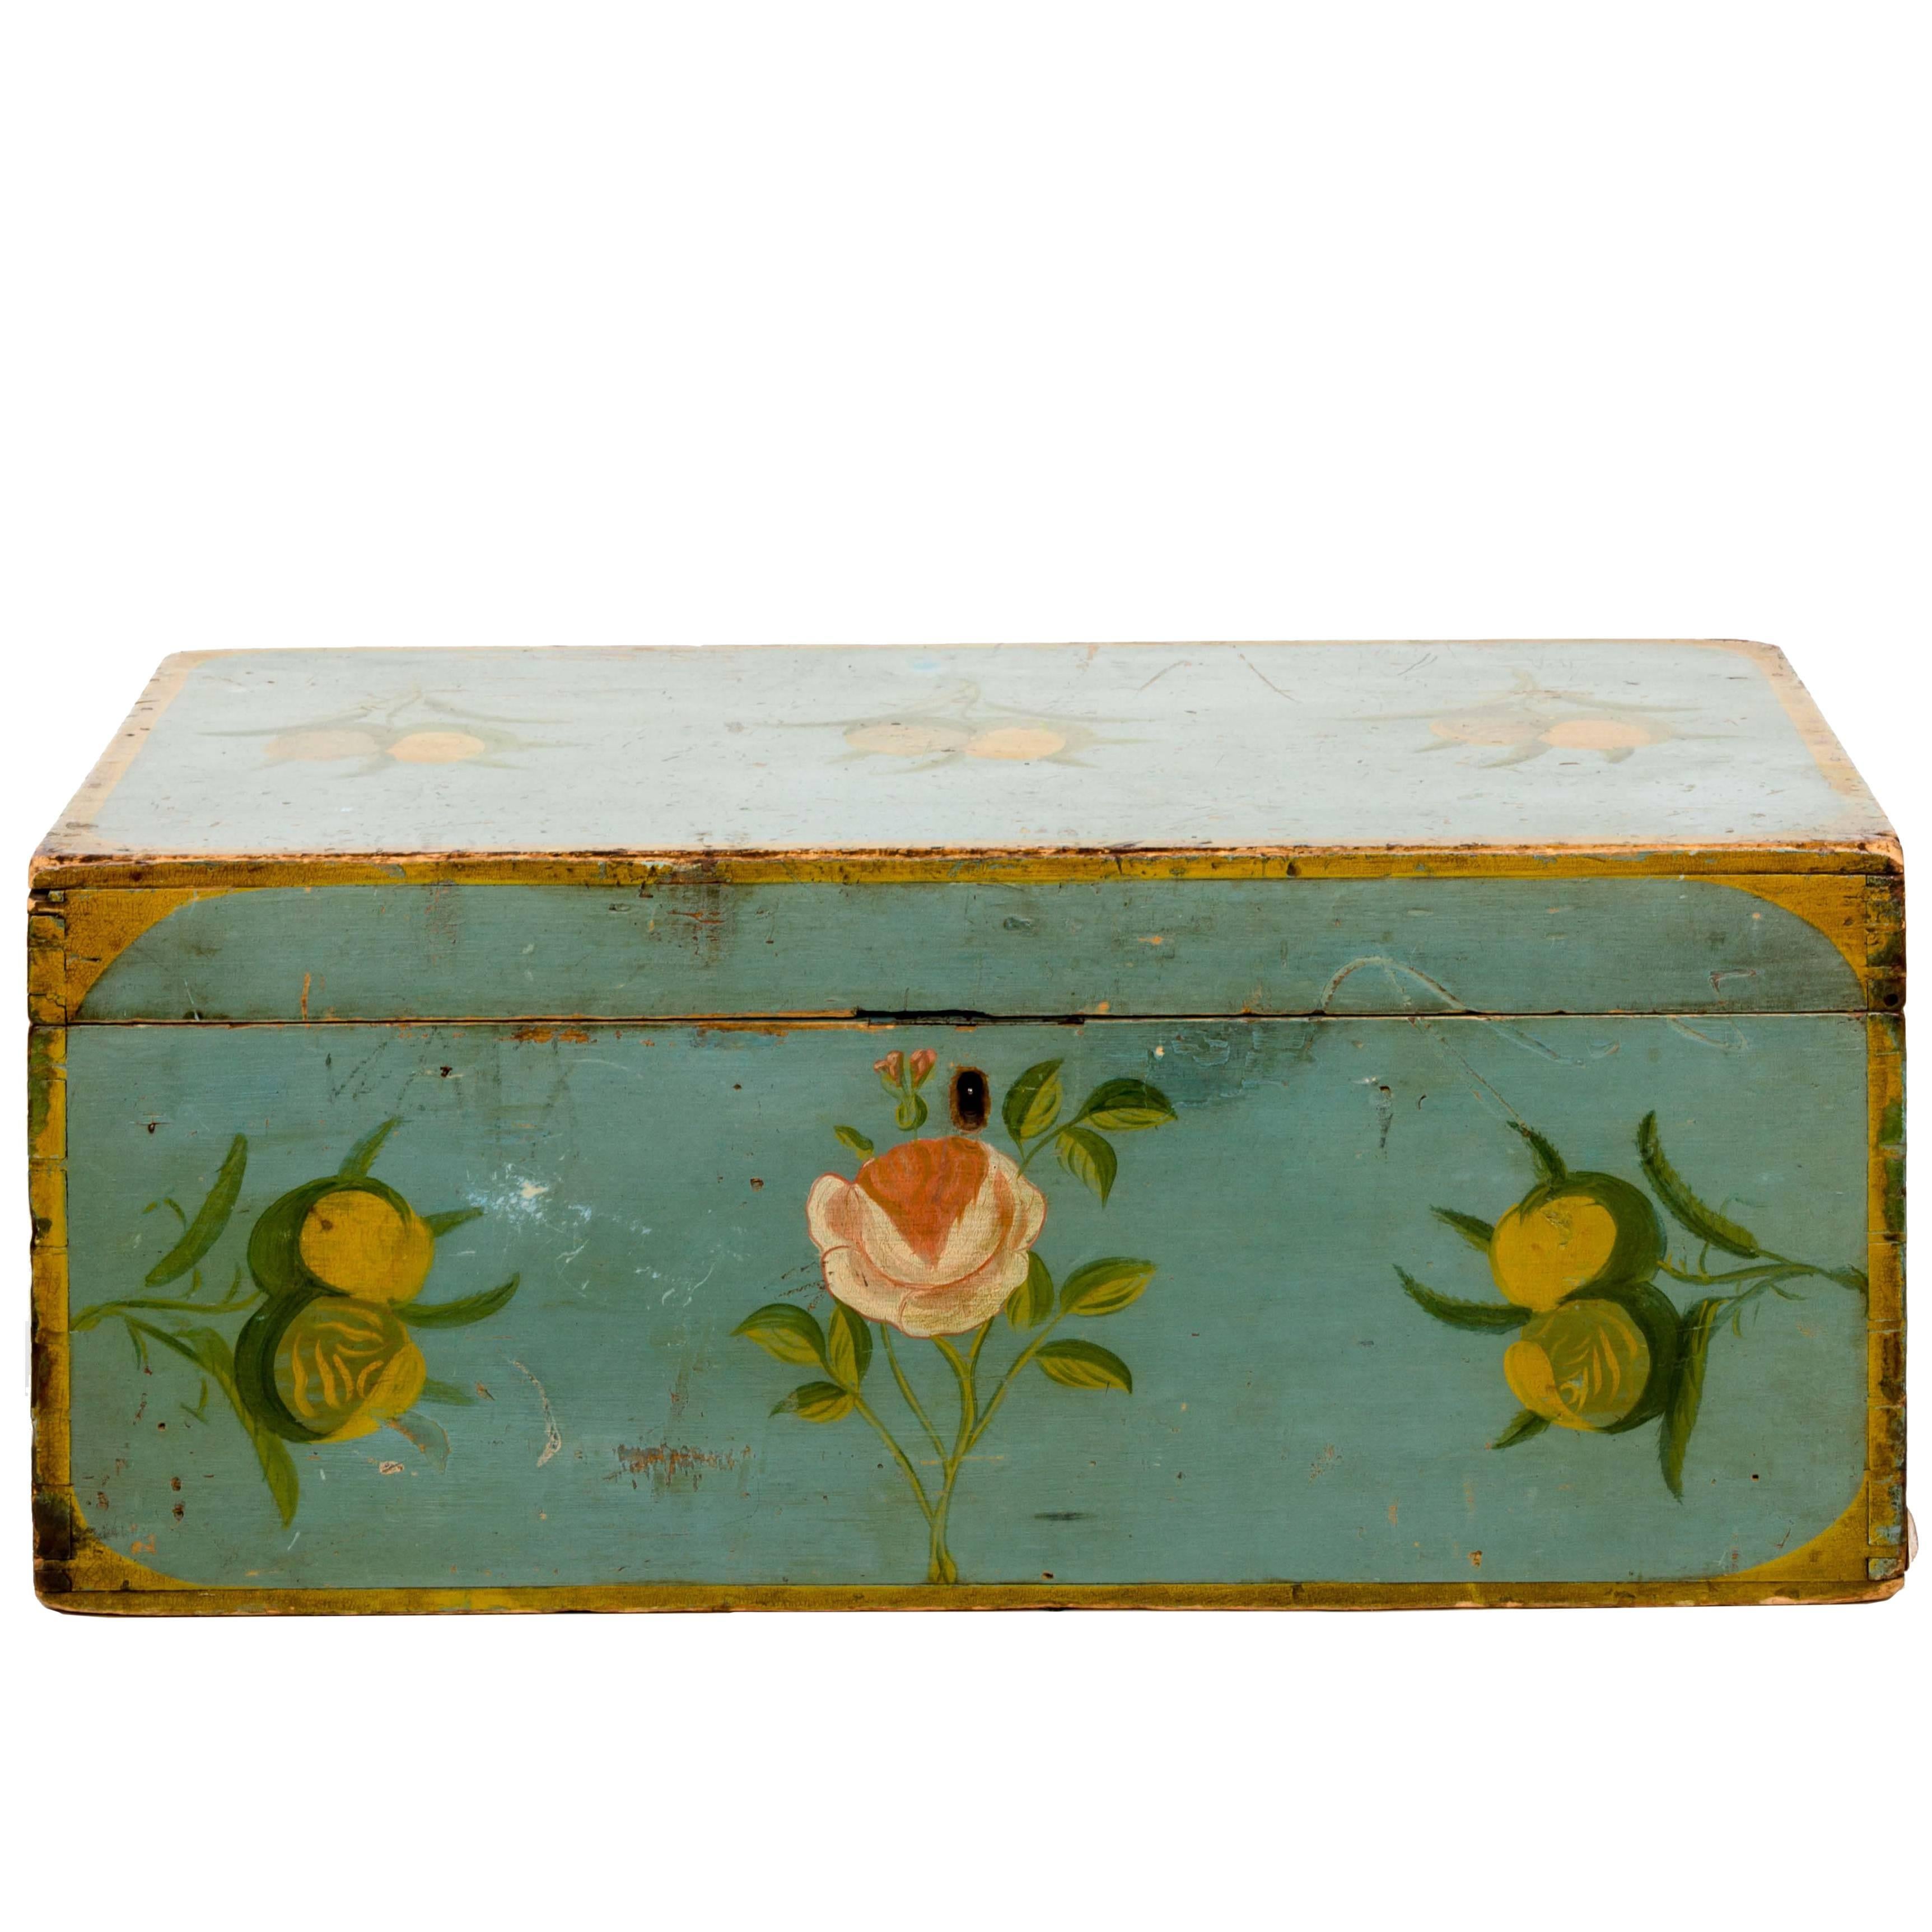 Painted American Folk Art Box For Sale